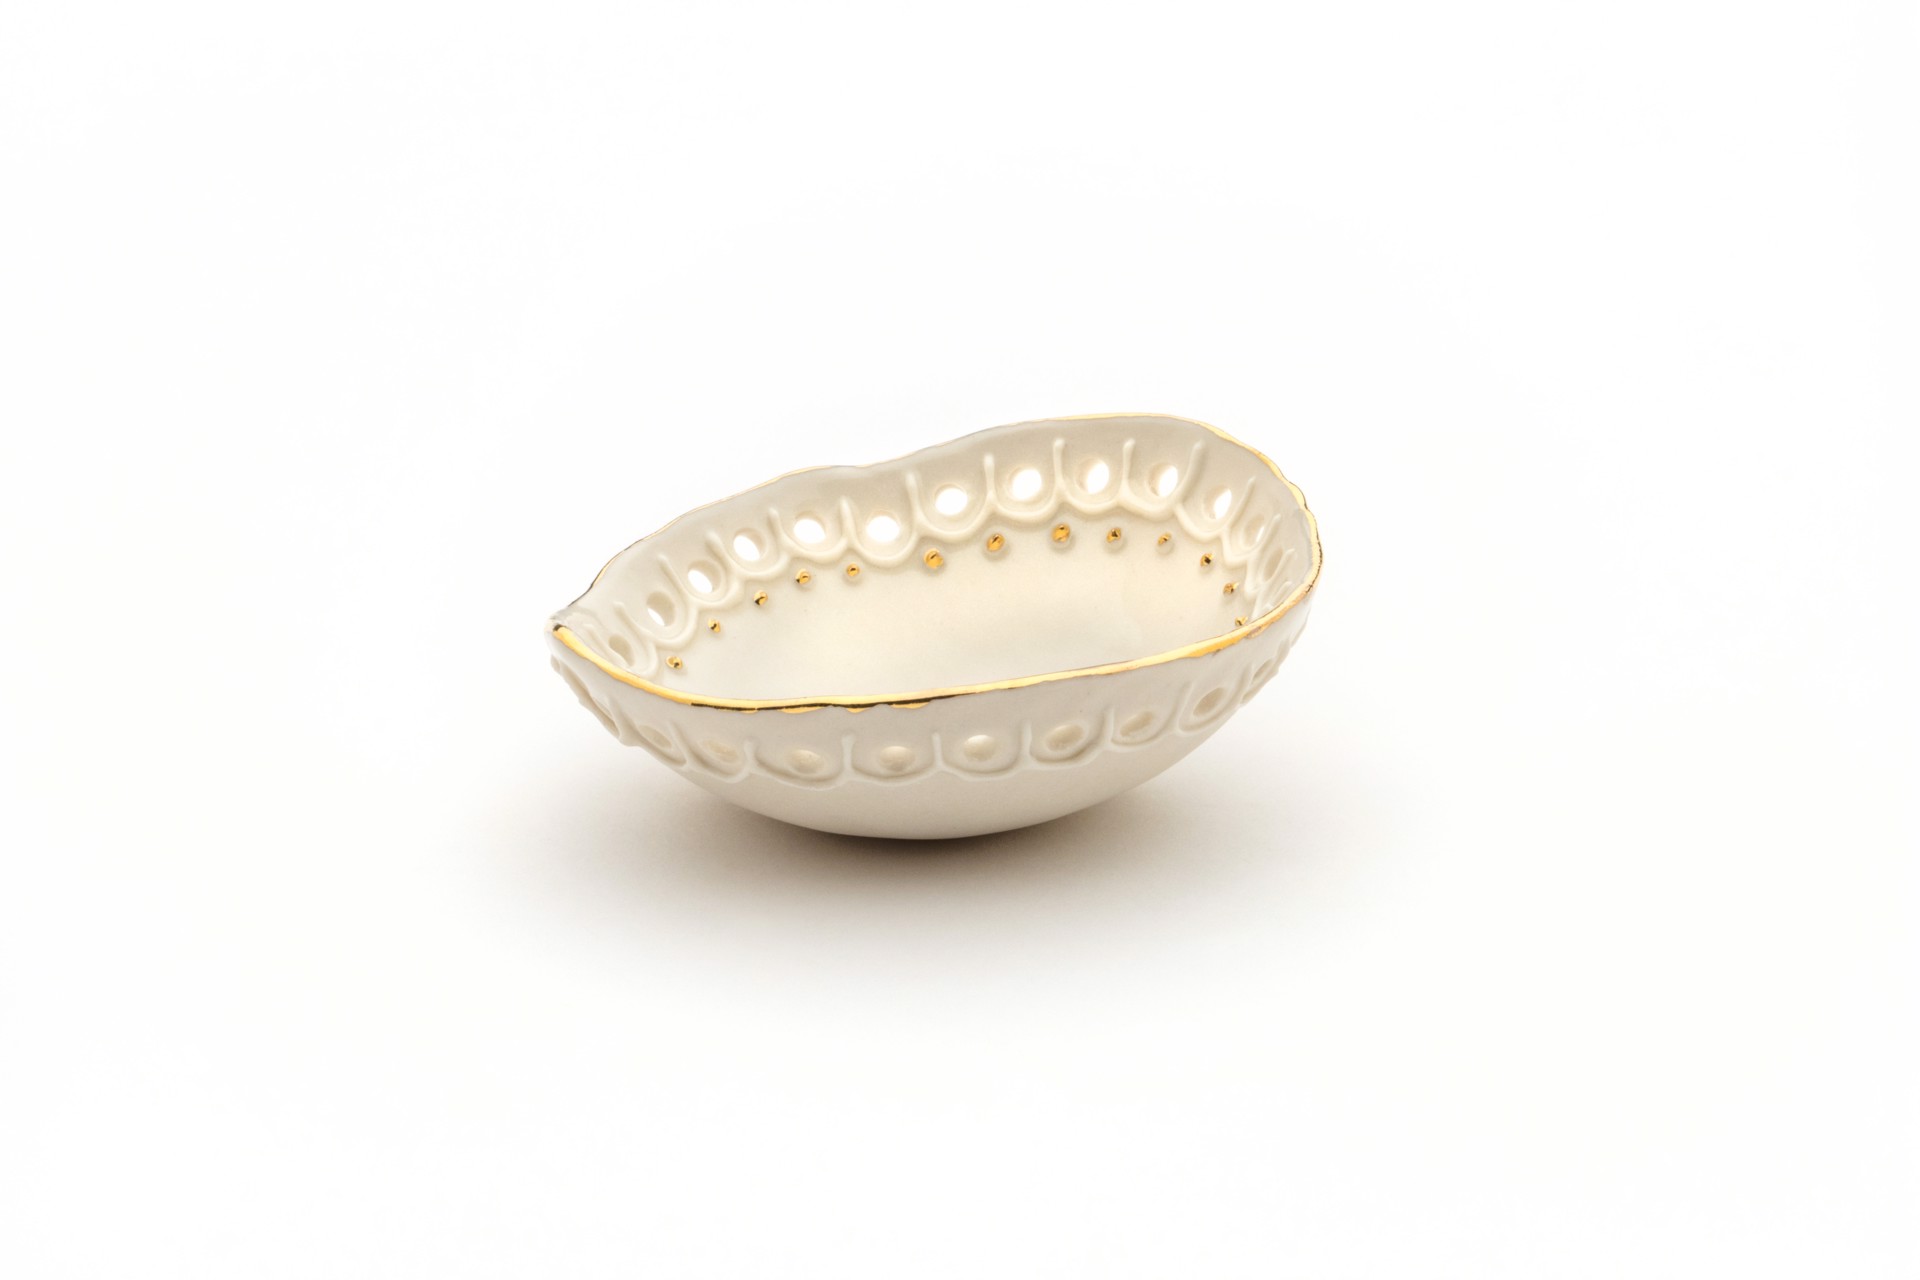 X-Small White Lacy Bowl (39) by Maria Bruckman